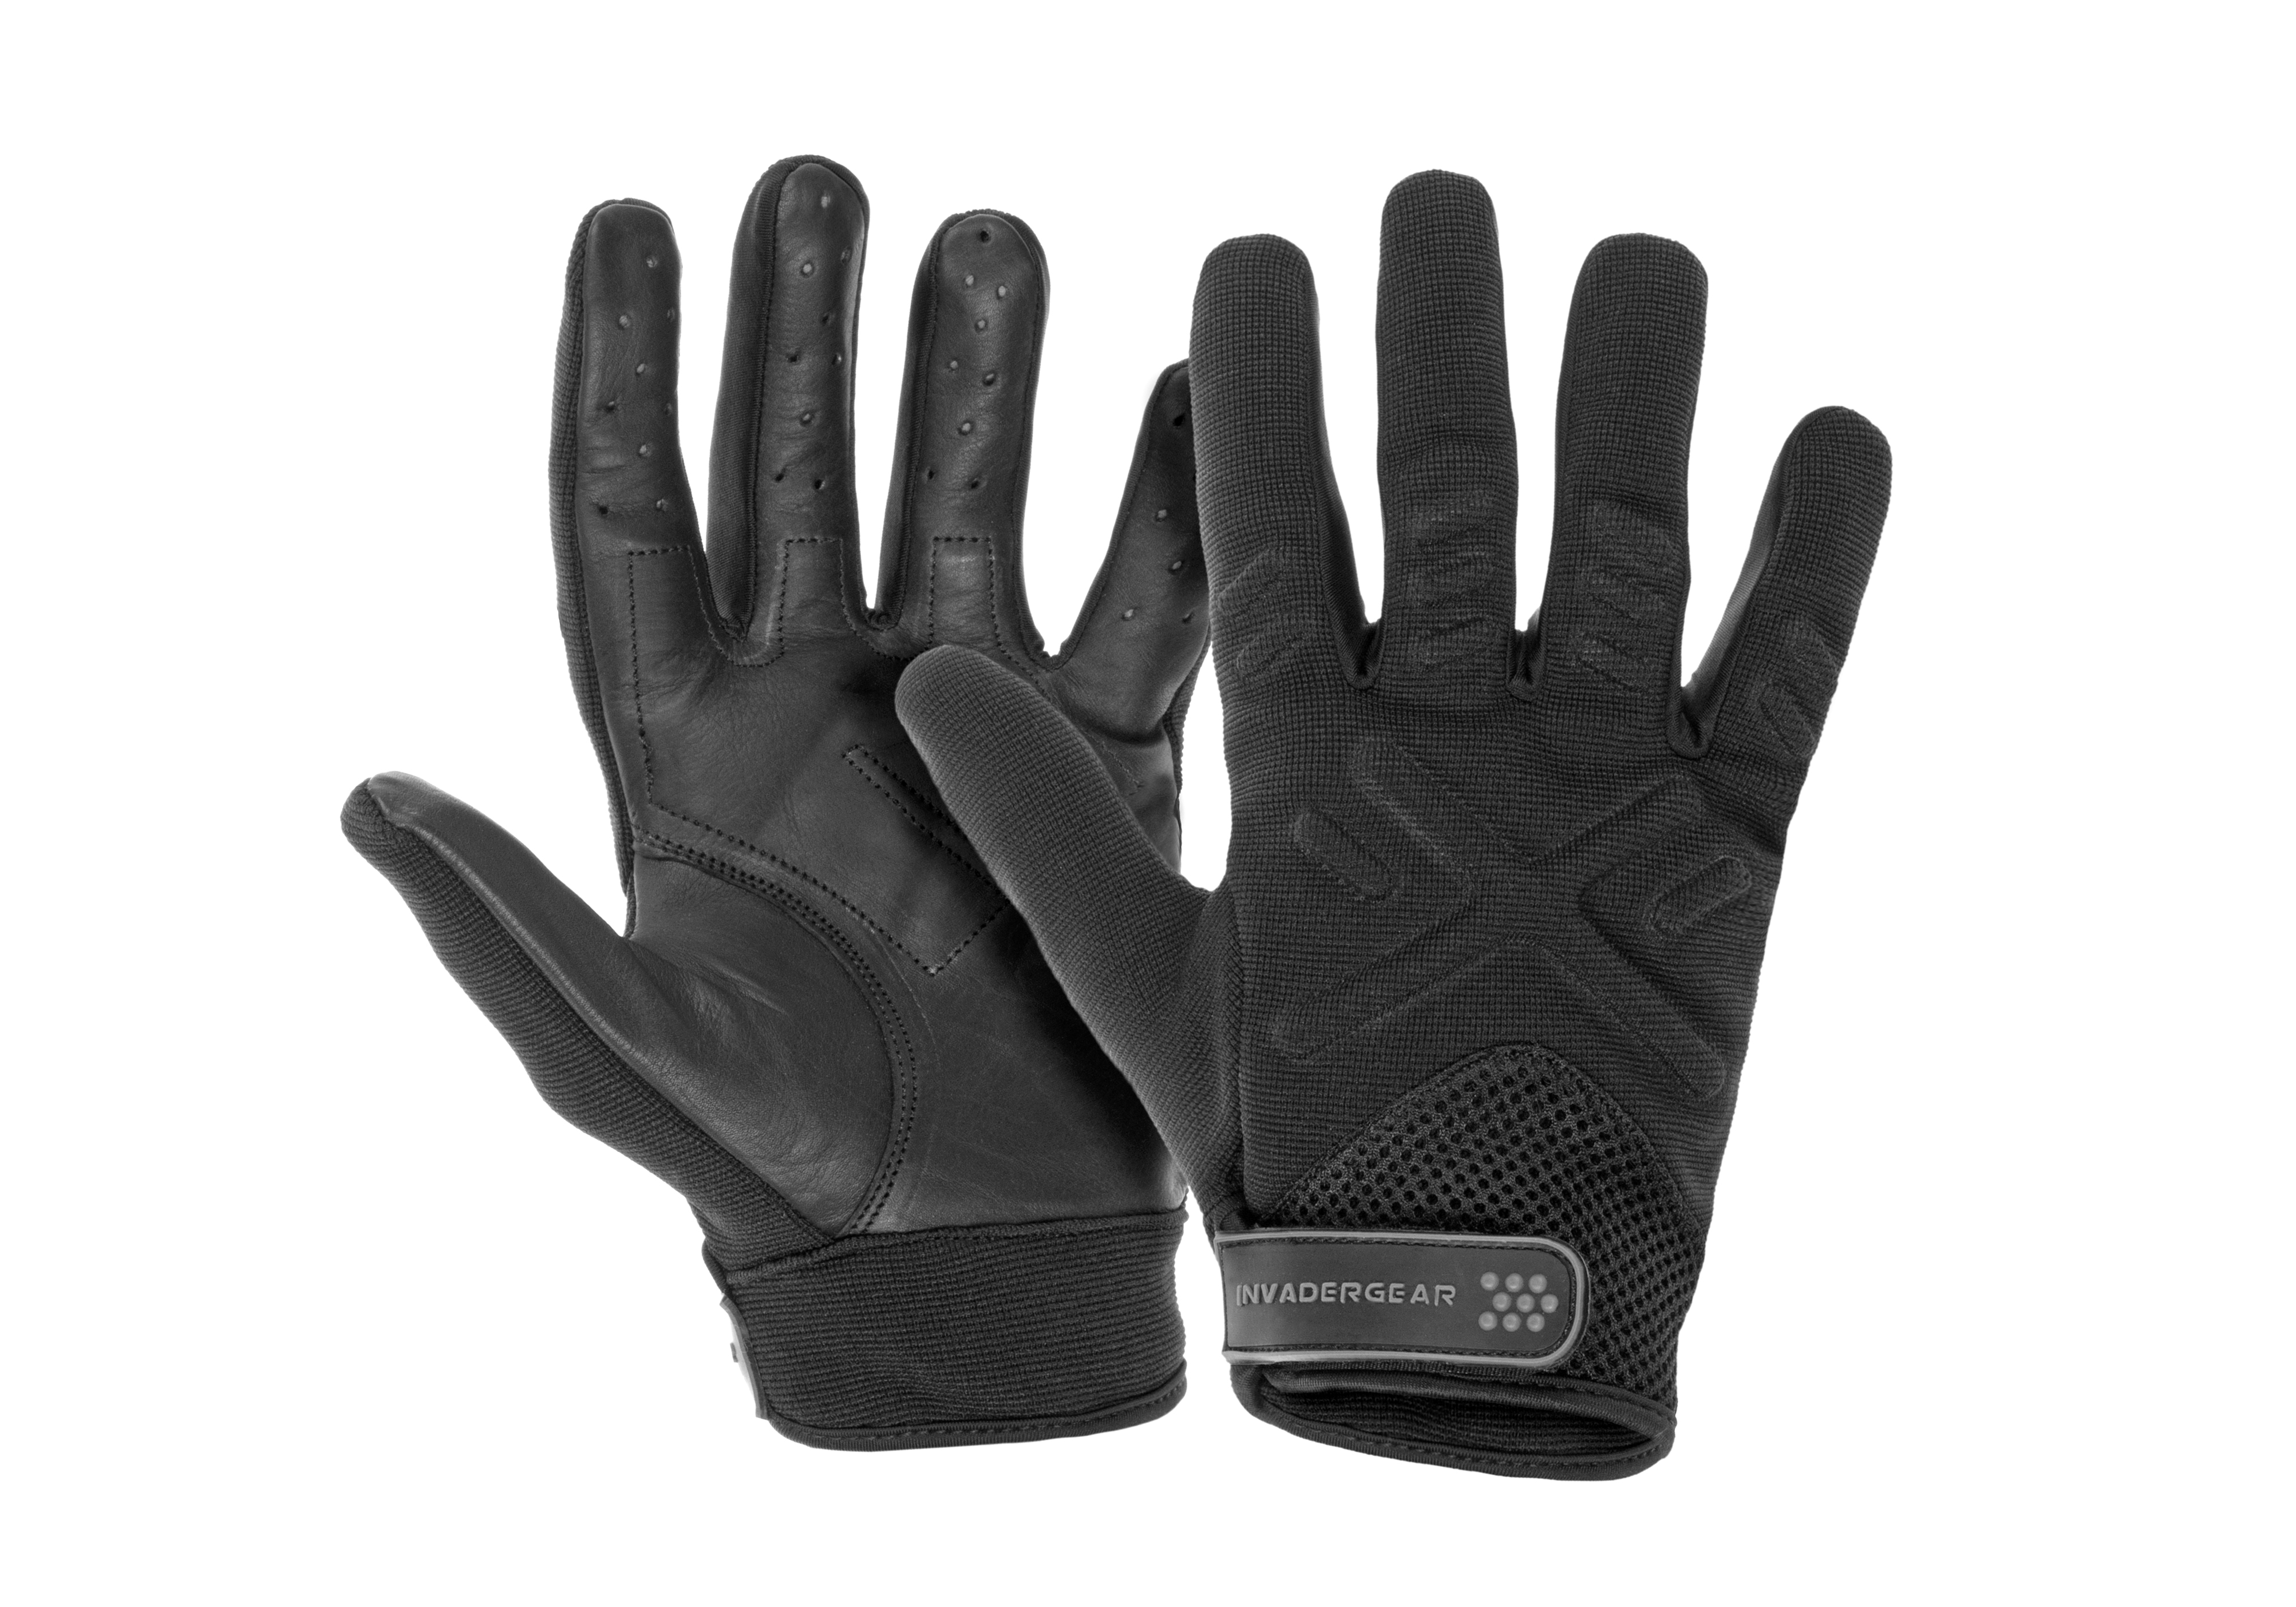 Hunting Gloves from HOT SHOT Gear 